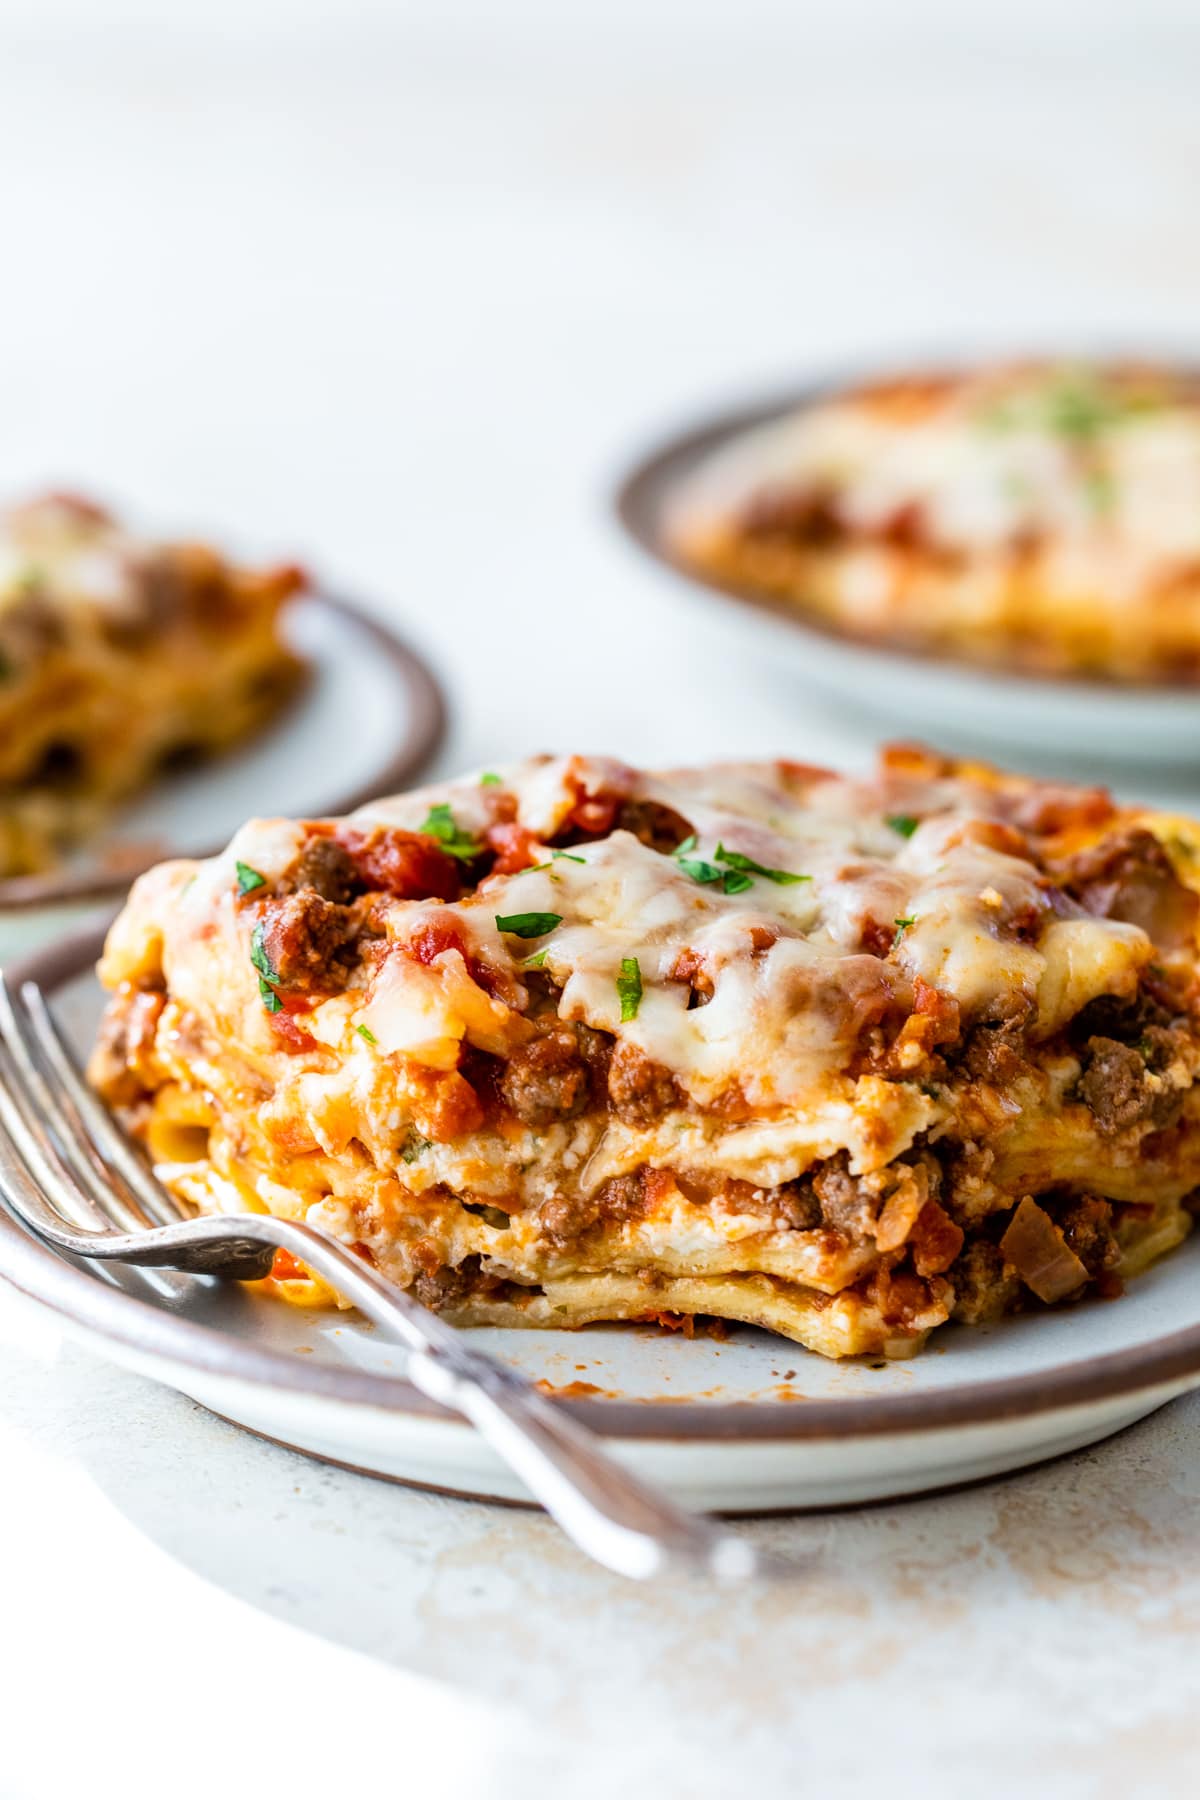 EAT CLEAN LASAGNA WITH MEAT SAUCE